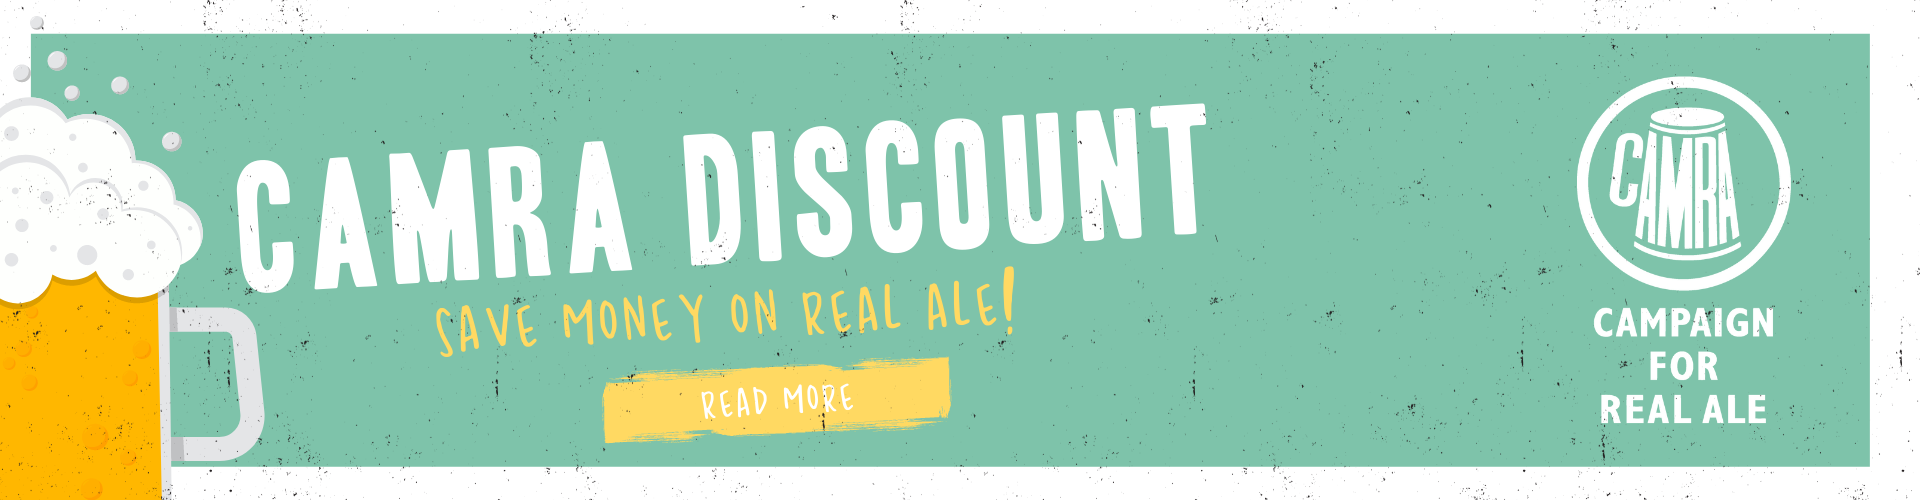 CAMRA Discount - Save Money on Real Ale!